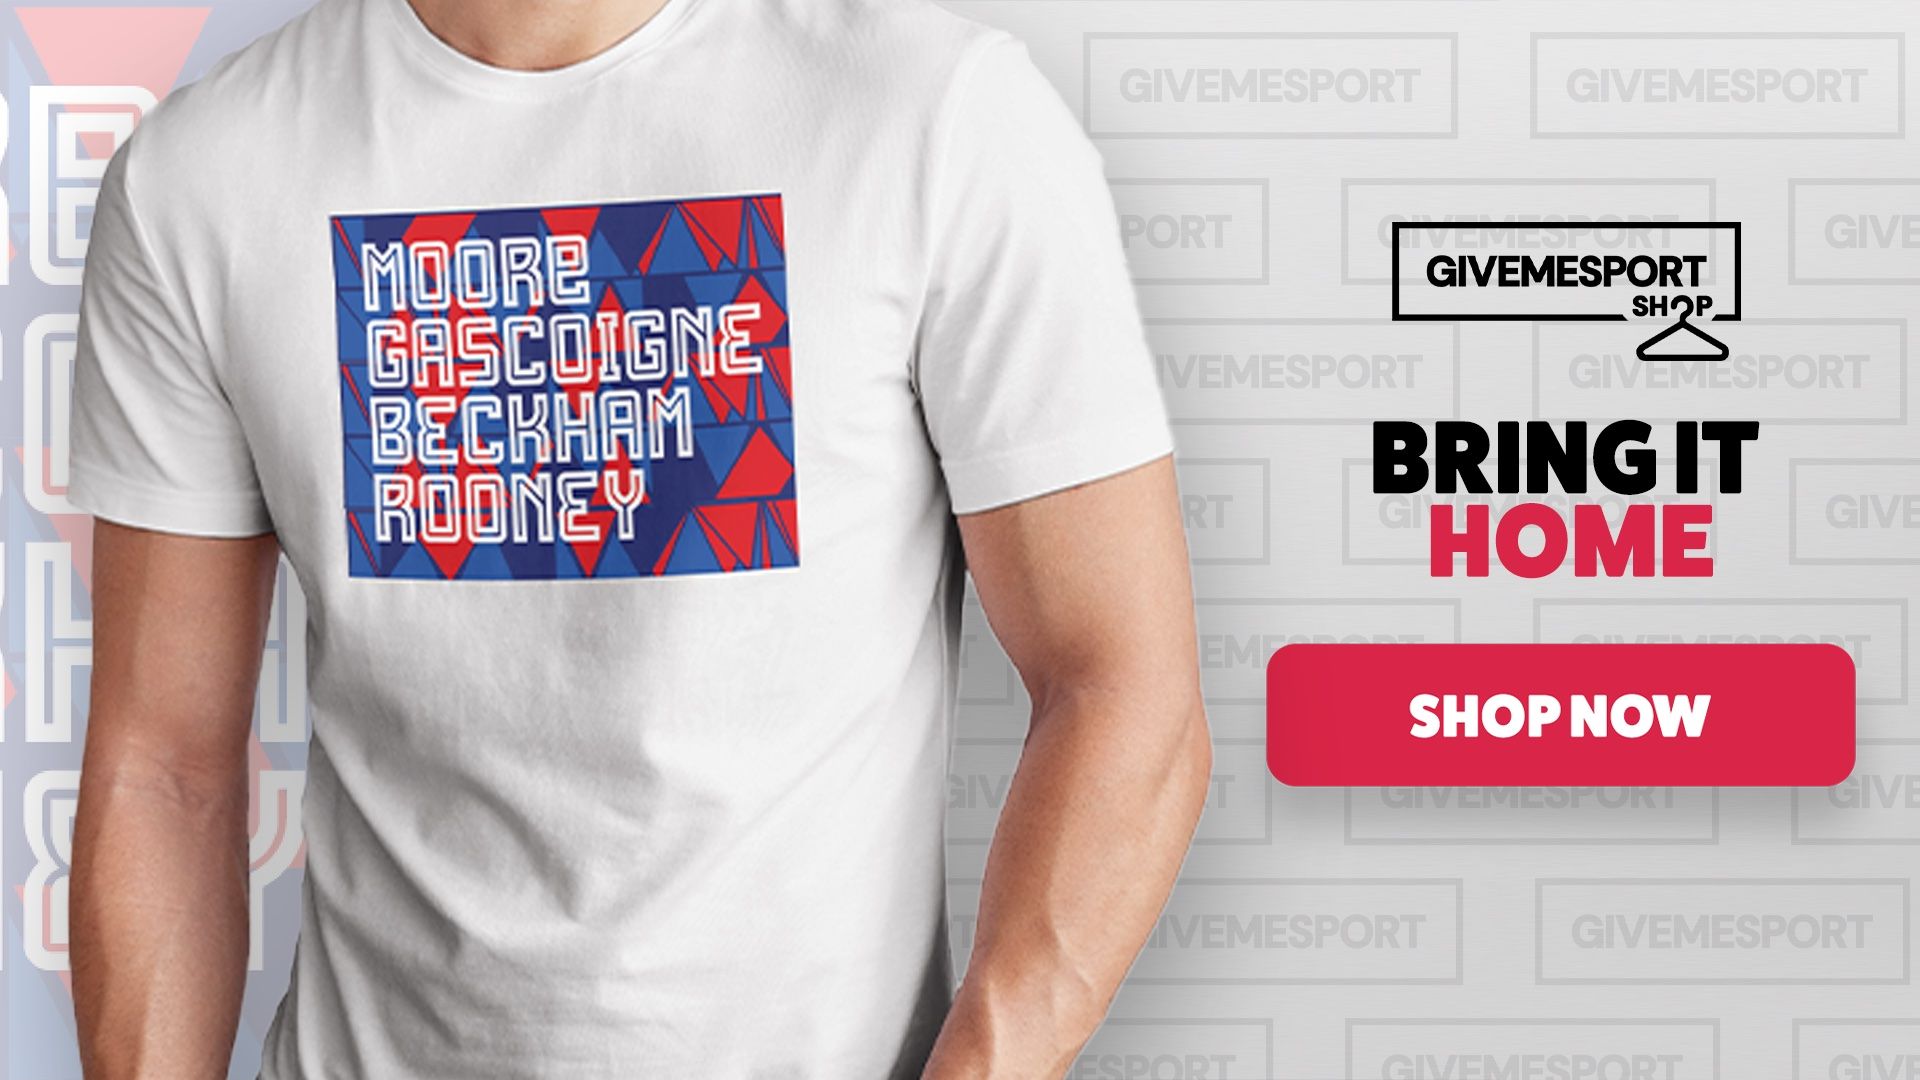 Buy your GMS England t-shirt.